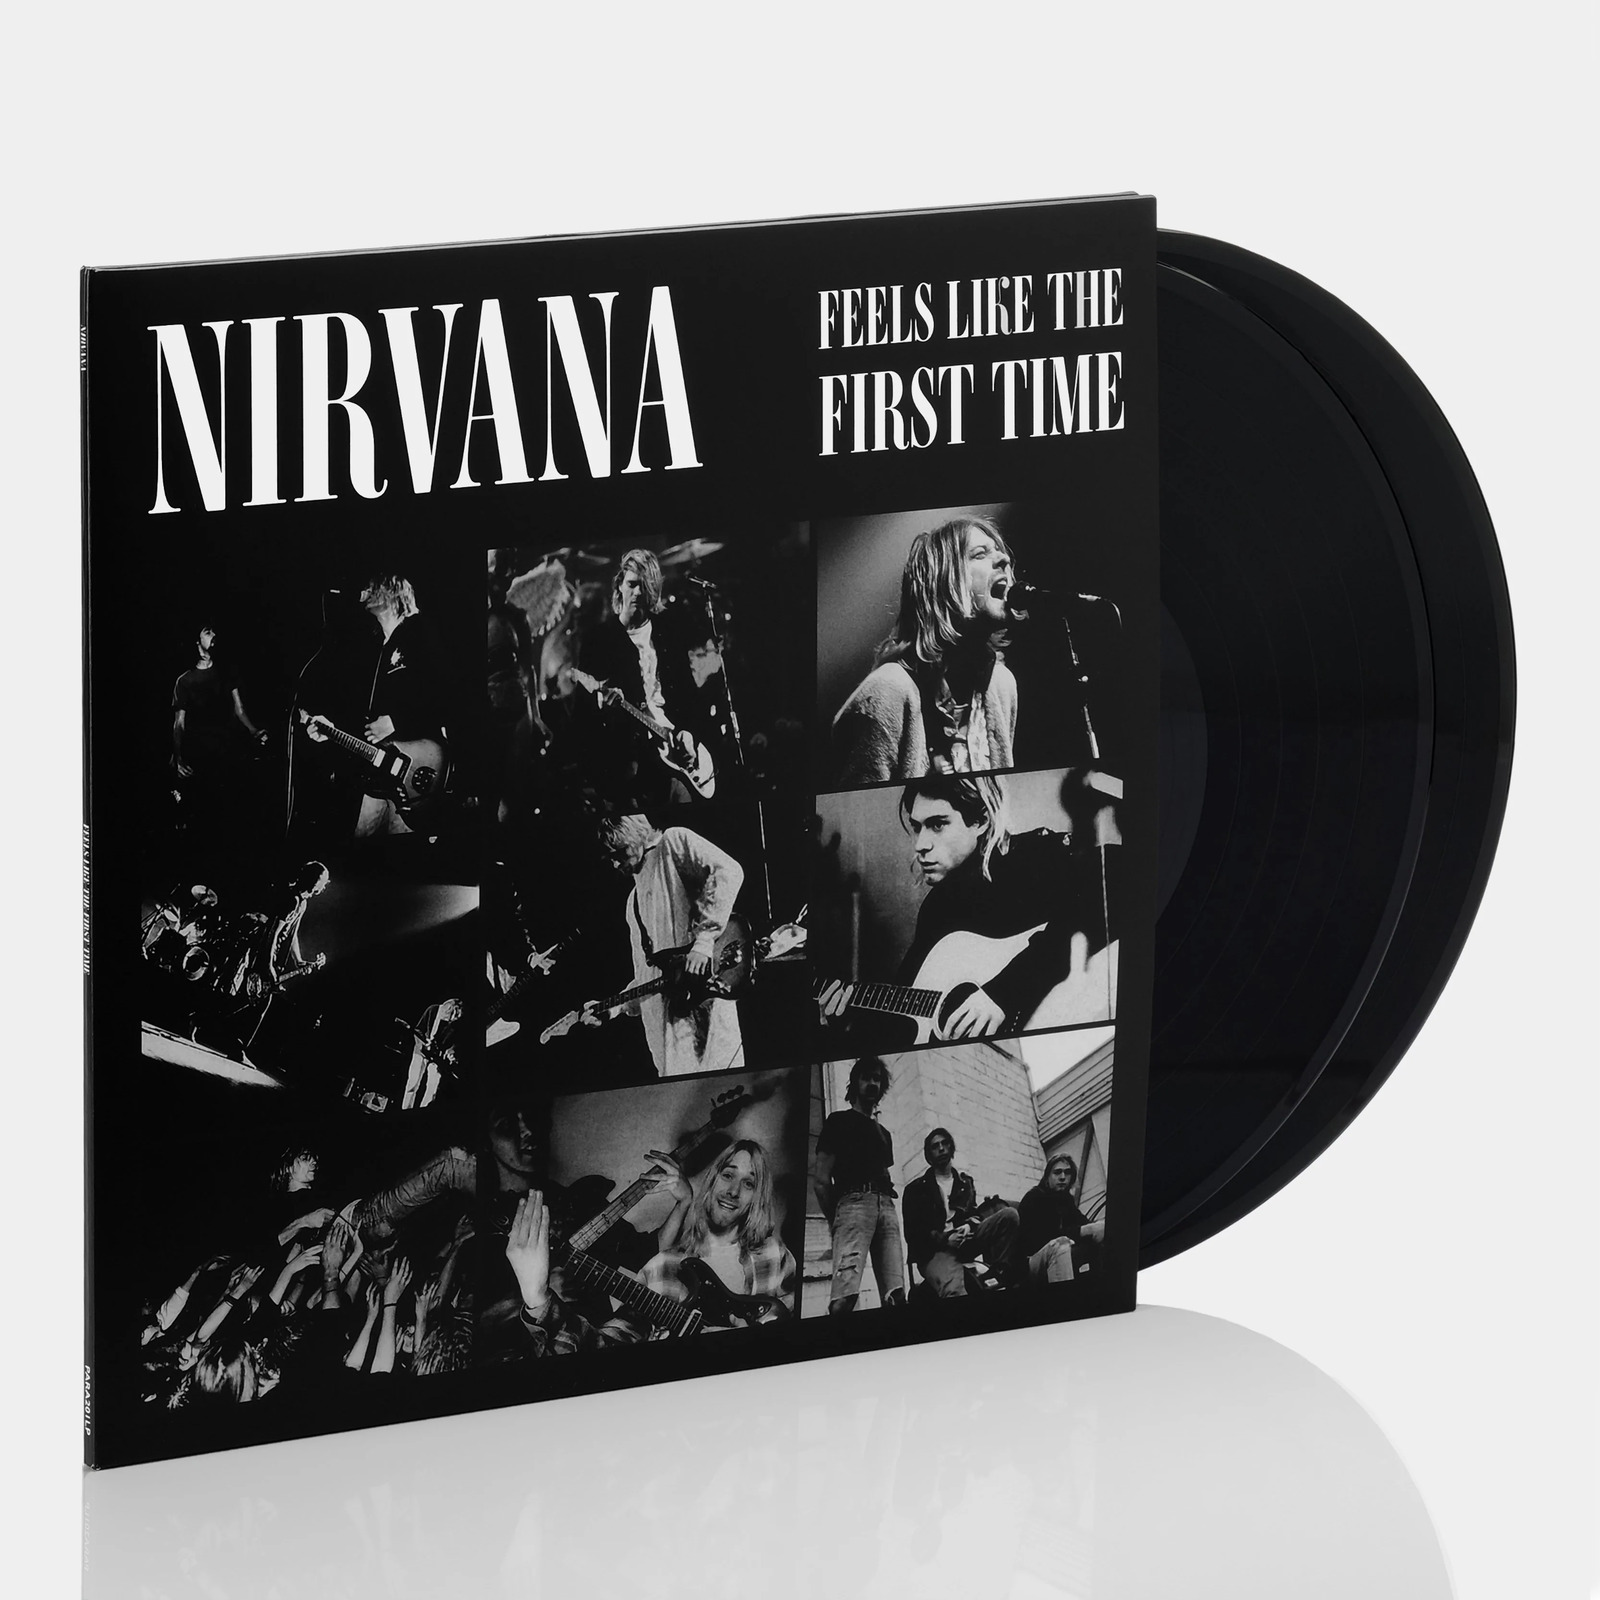 Nirvana - Feels Like The First Time 2xLP Vinyl Record